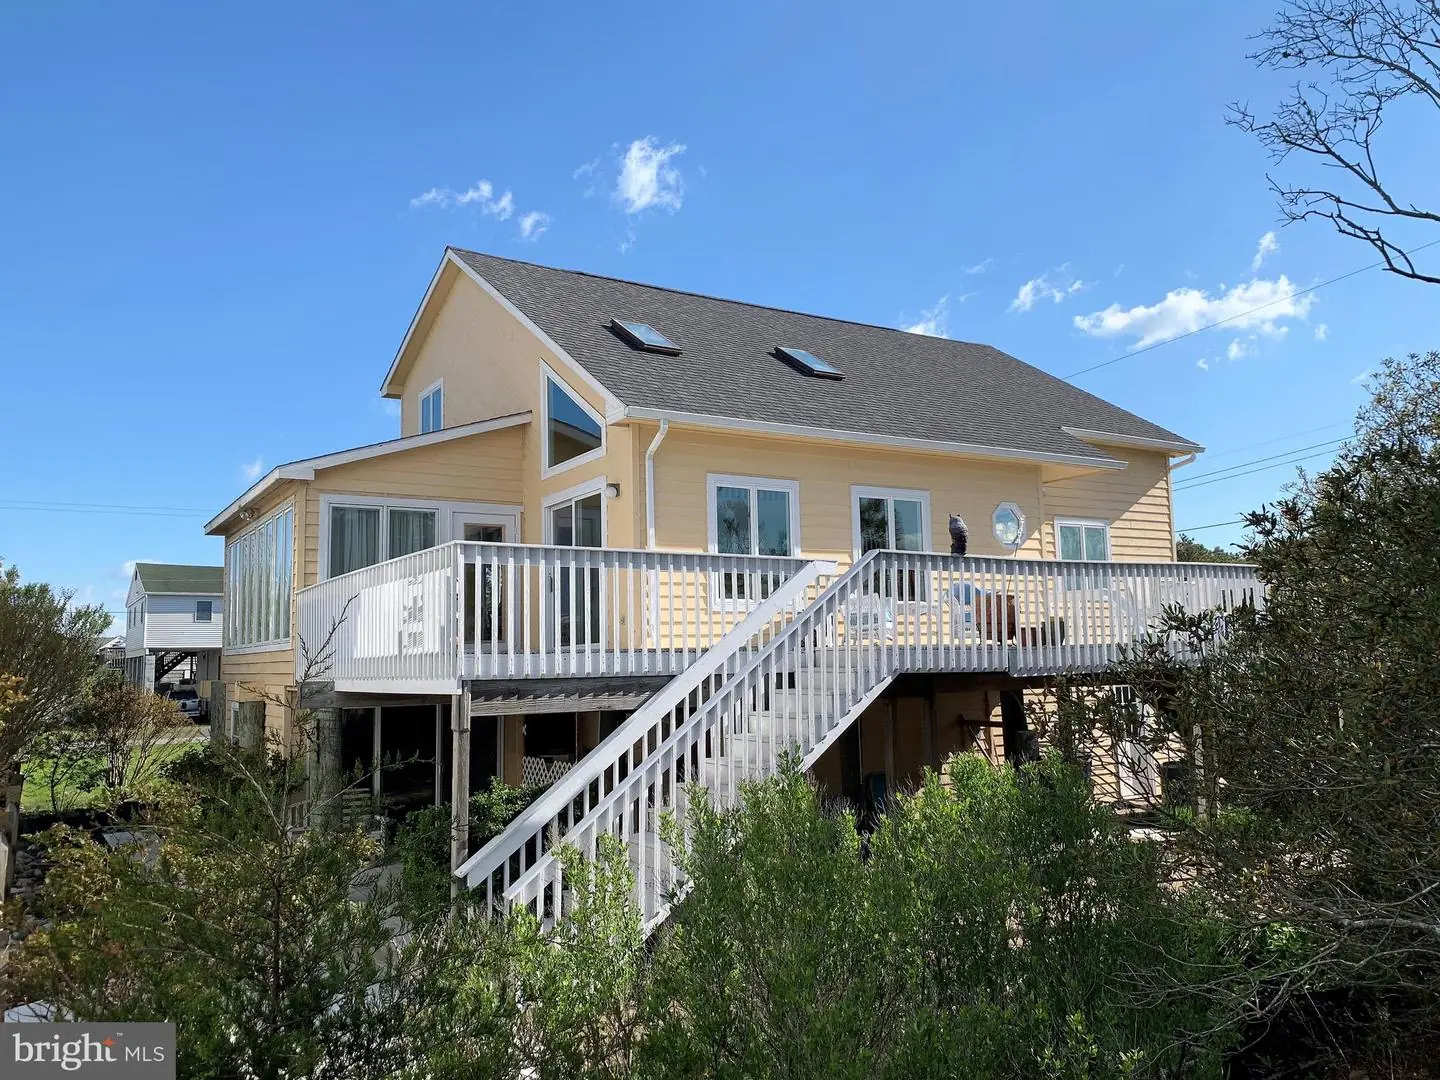 DESU164670-304207560367-2021-07-17-02-03-15 35199 Hassell Ave | Bethany Beach, DE Real Estate For Sale | MLS# Desu164670  - 1st Choice Properties